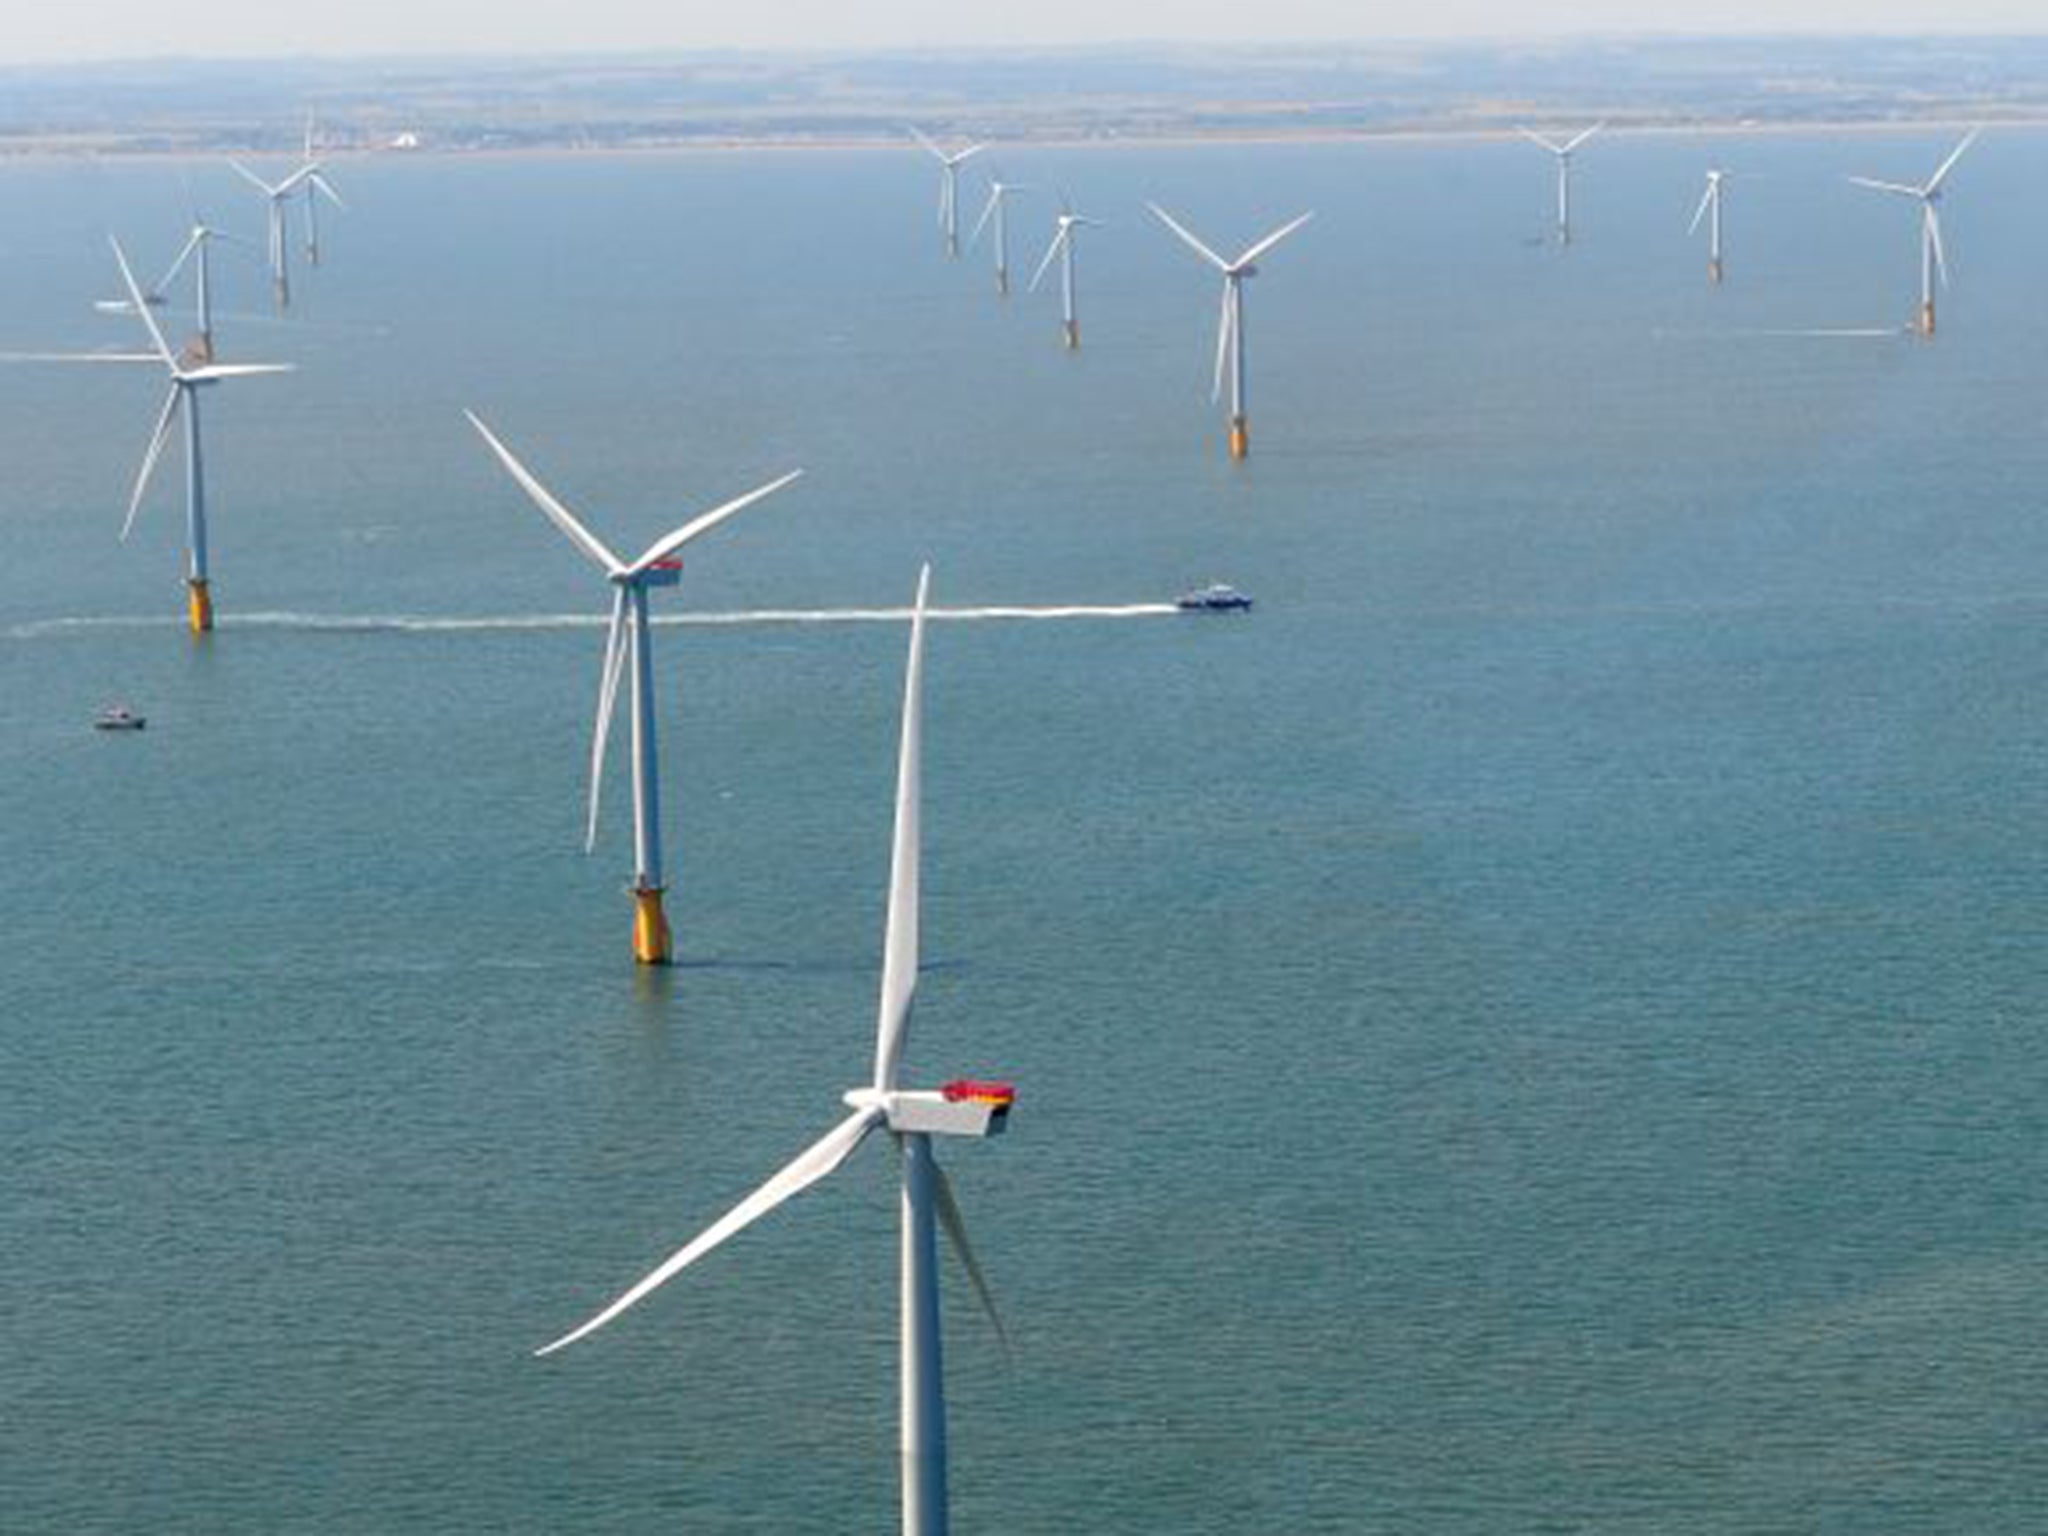 The biggest cluster of offshore wind farms in Europe lies off Grimsby